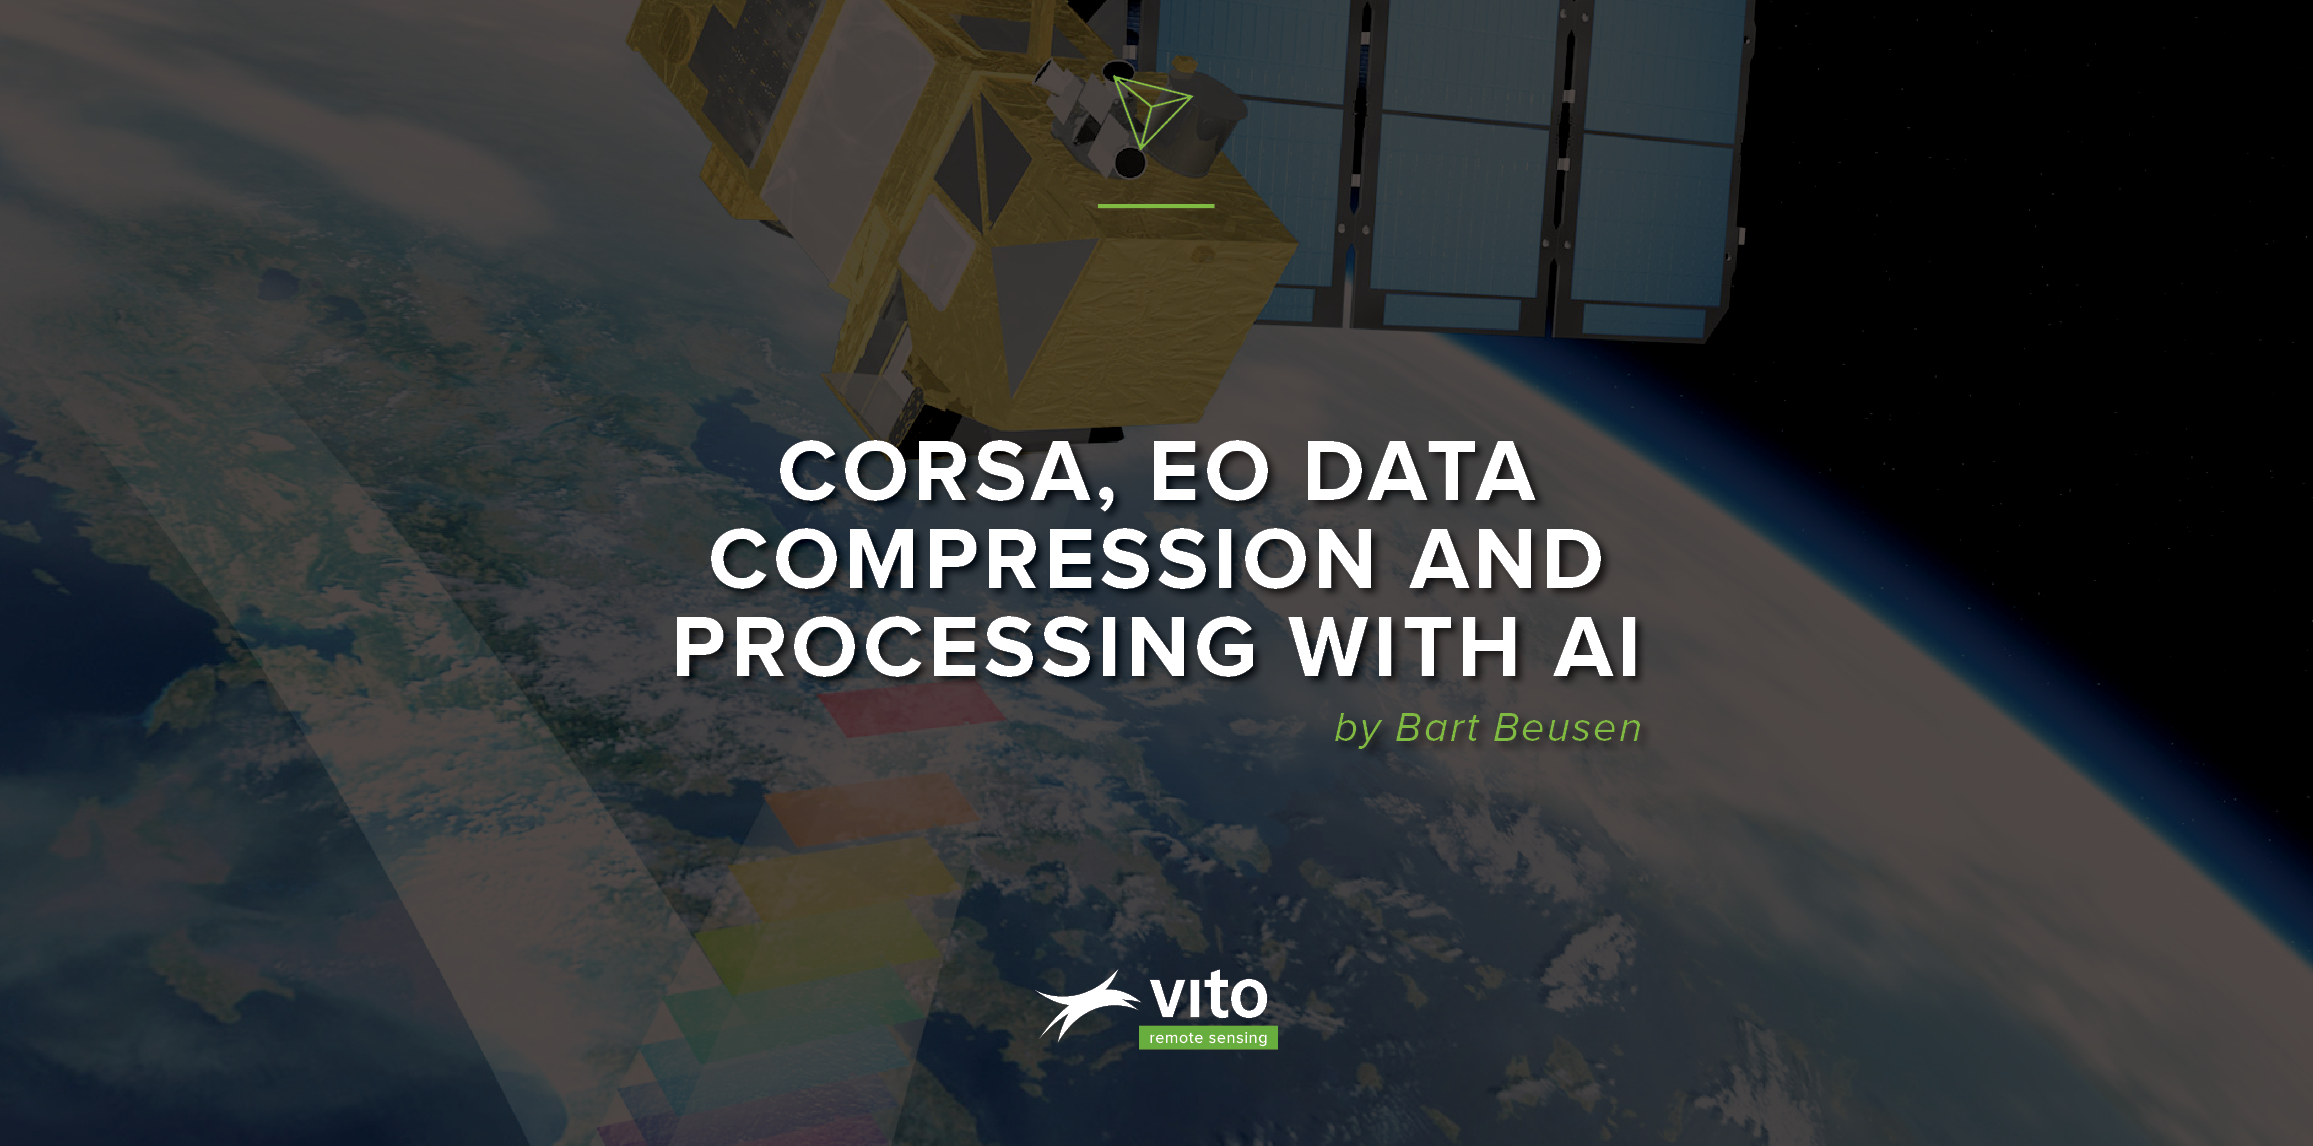 CORSA, EO DATA COMPRESSION AND PROCESSING WITH AI